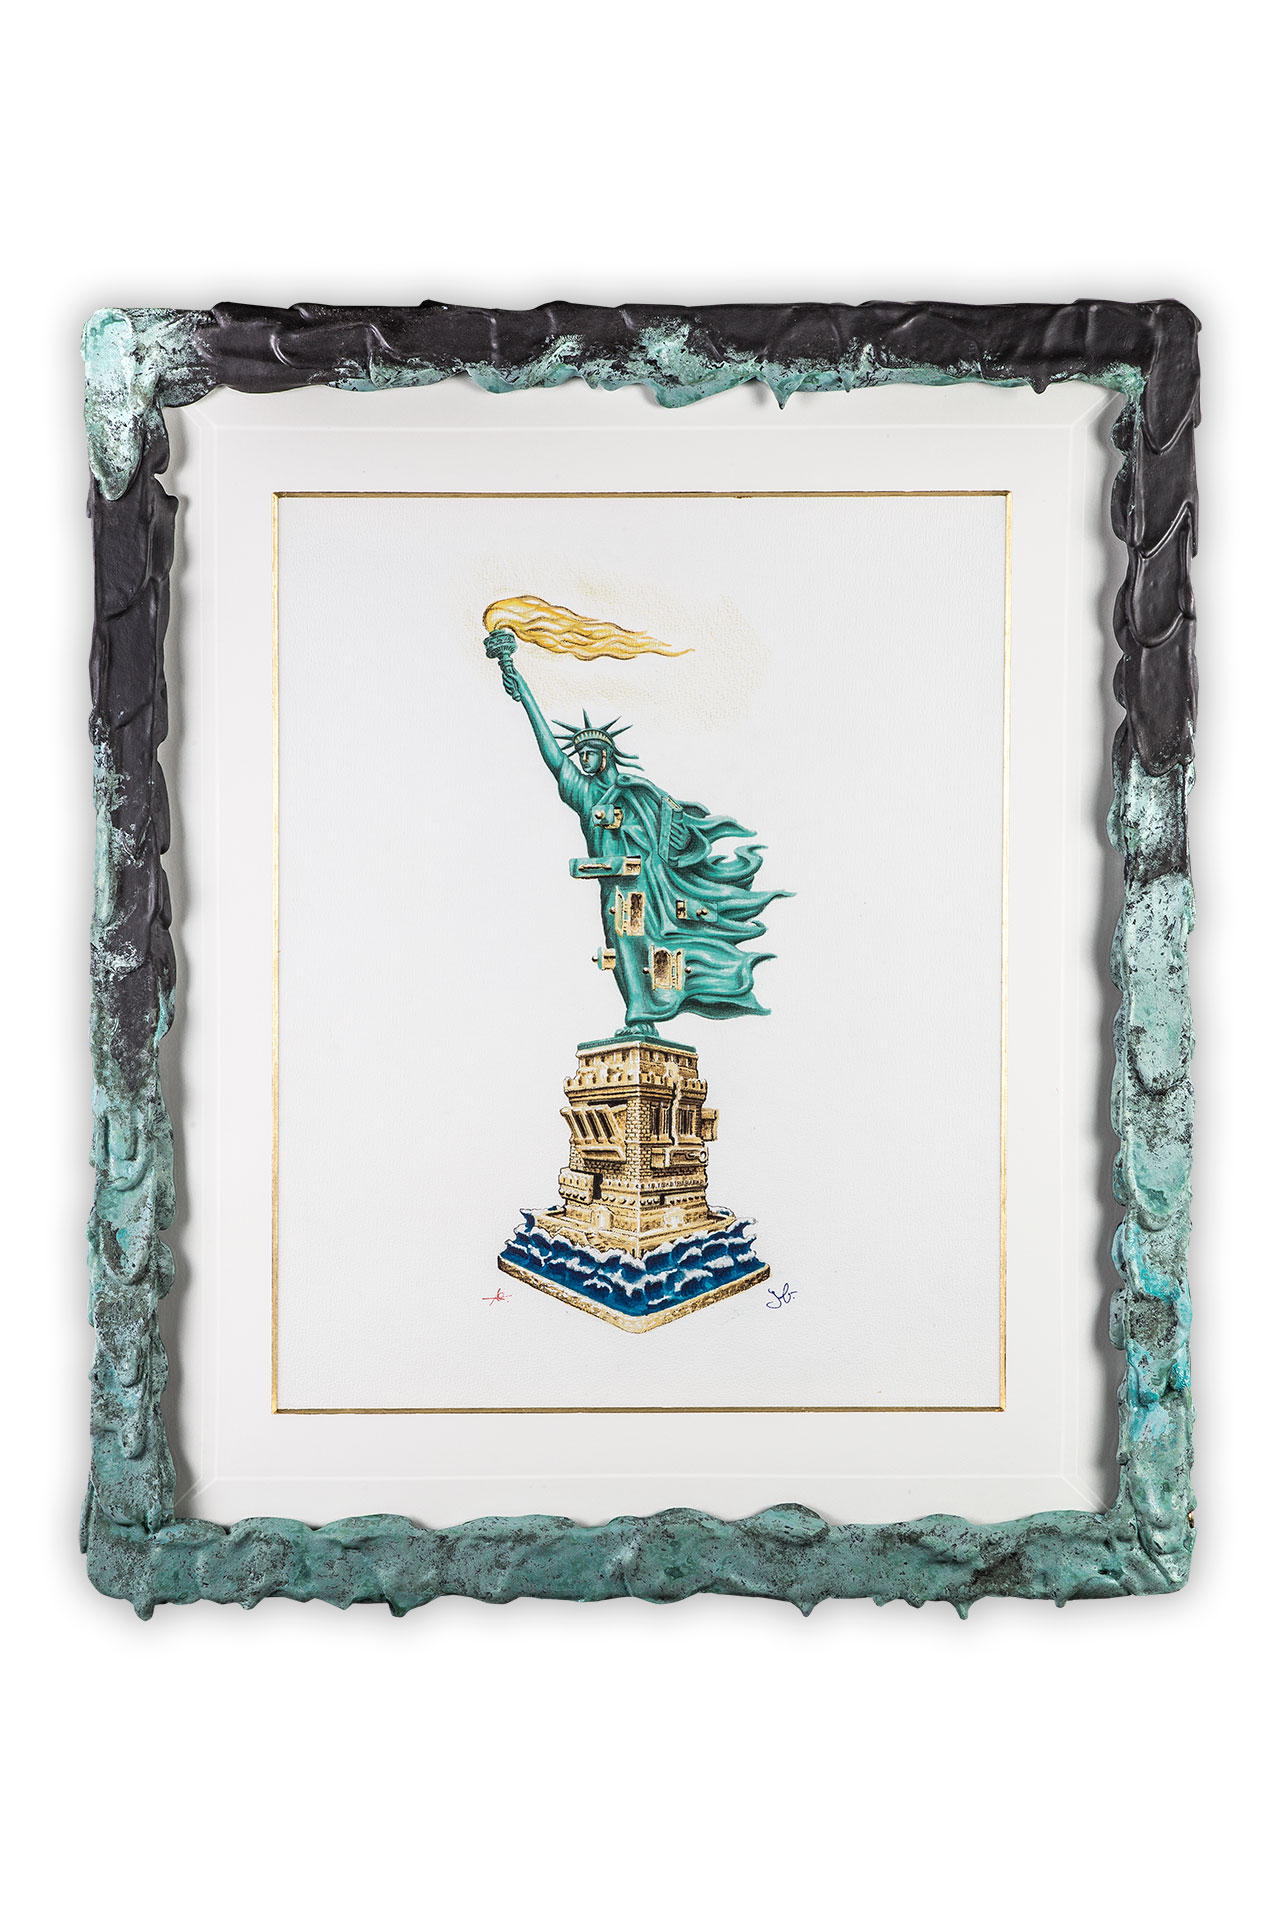 Studio Job, Lady Liberty, 2019. Drawing in crayon, felt-tip, ink, and 24k gold on paper. Patinated frame with faceted glass.
Courtesy of R &amp; Company and Studio Job.